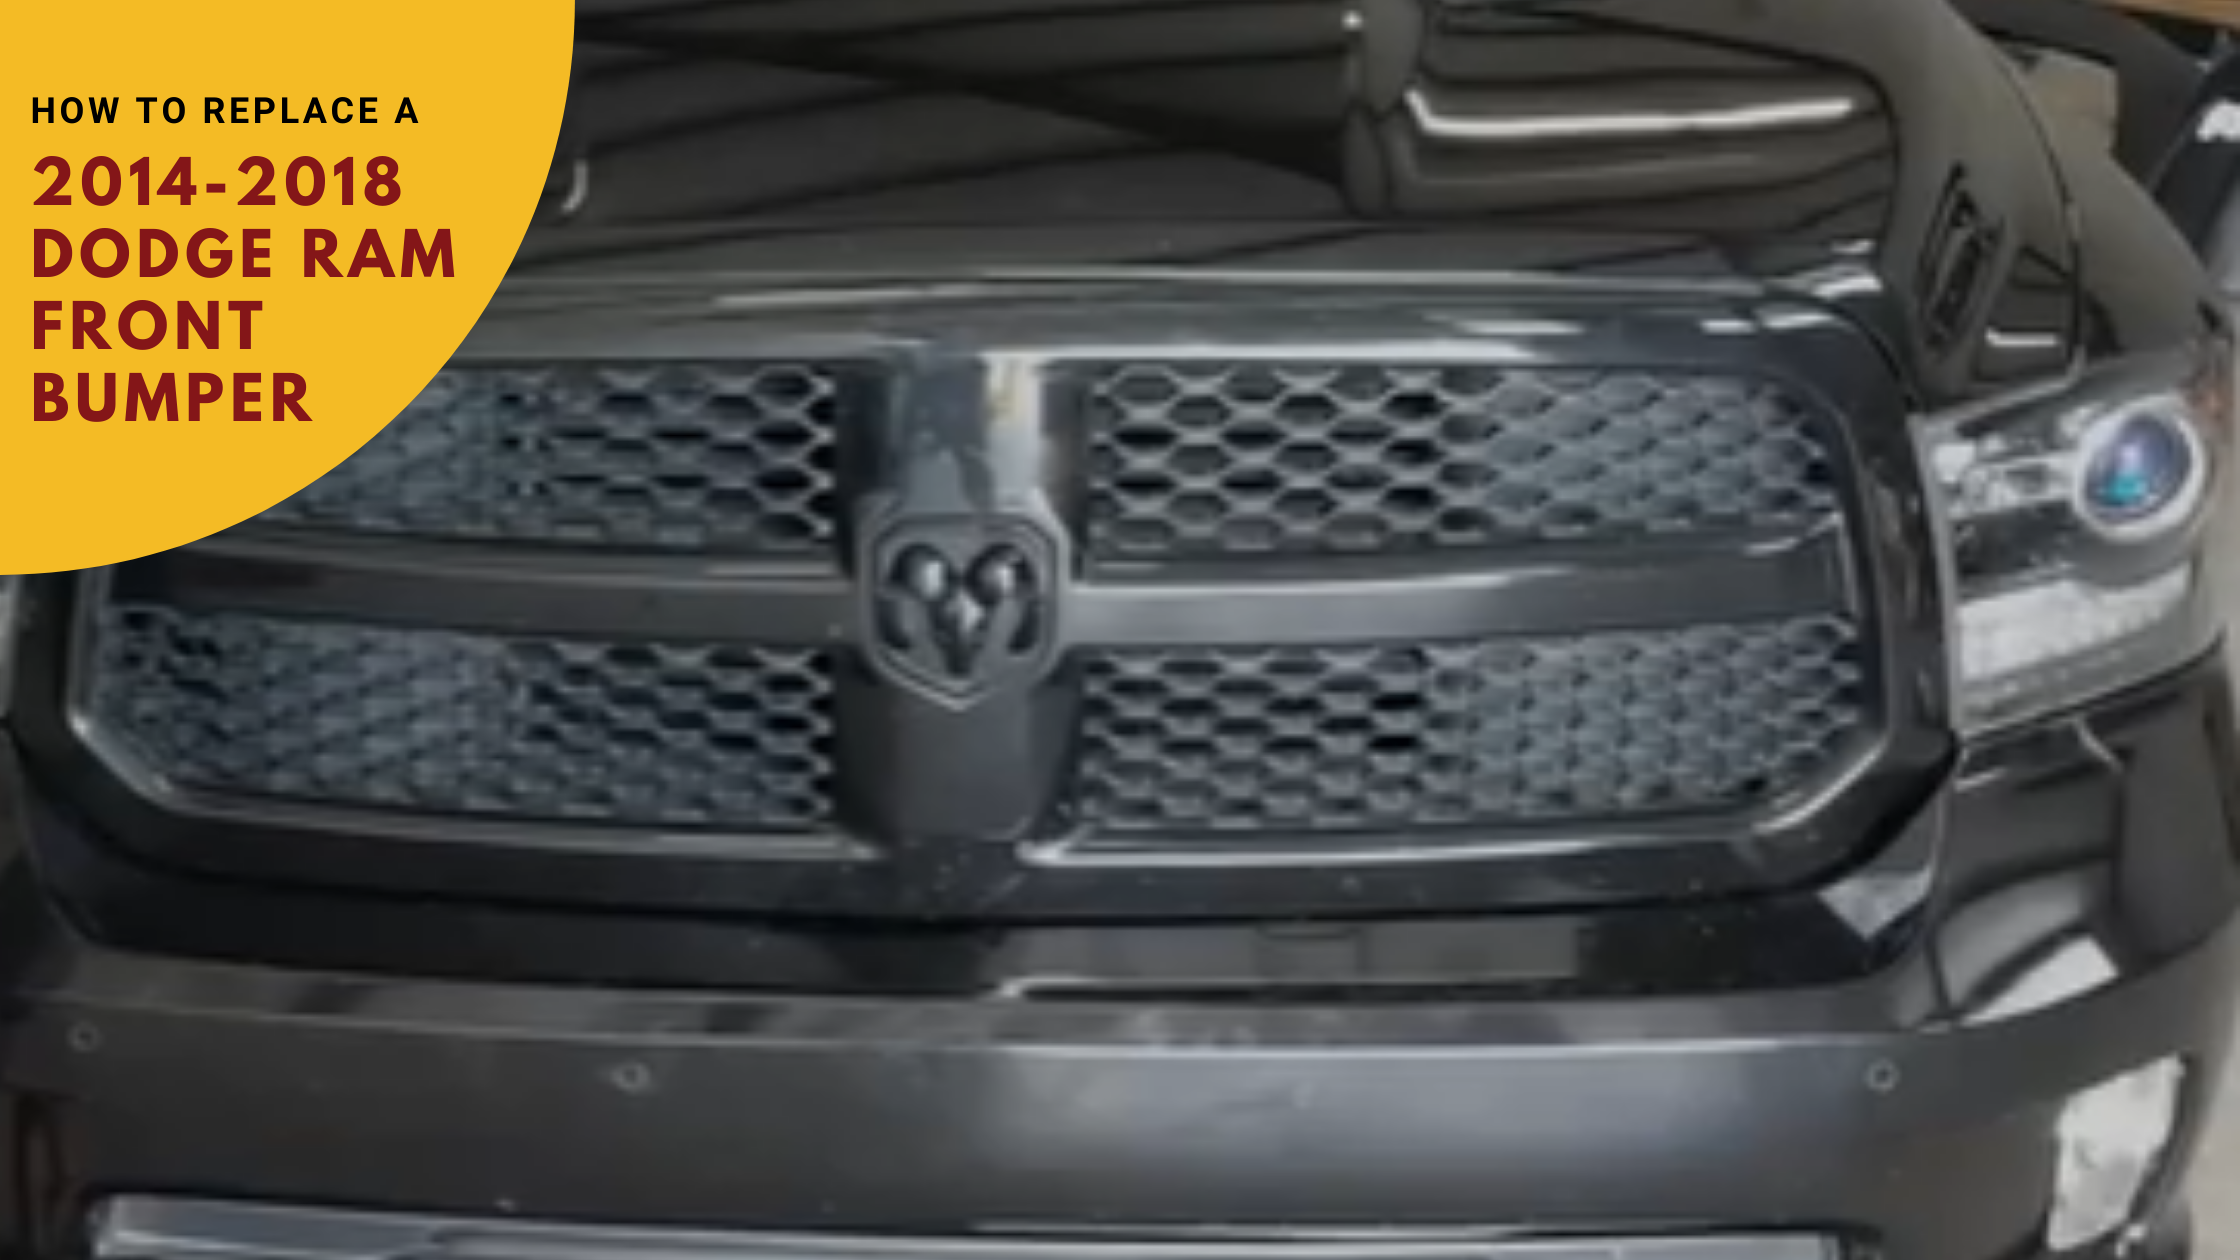 2014-2018 Dodge Ram 1500 Front Bumper Removal and Replacement